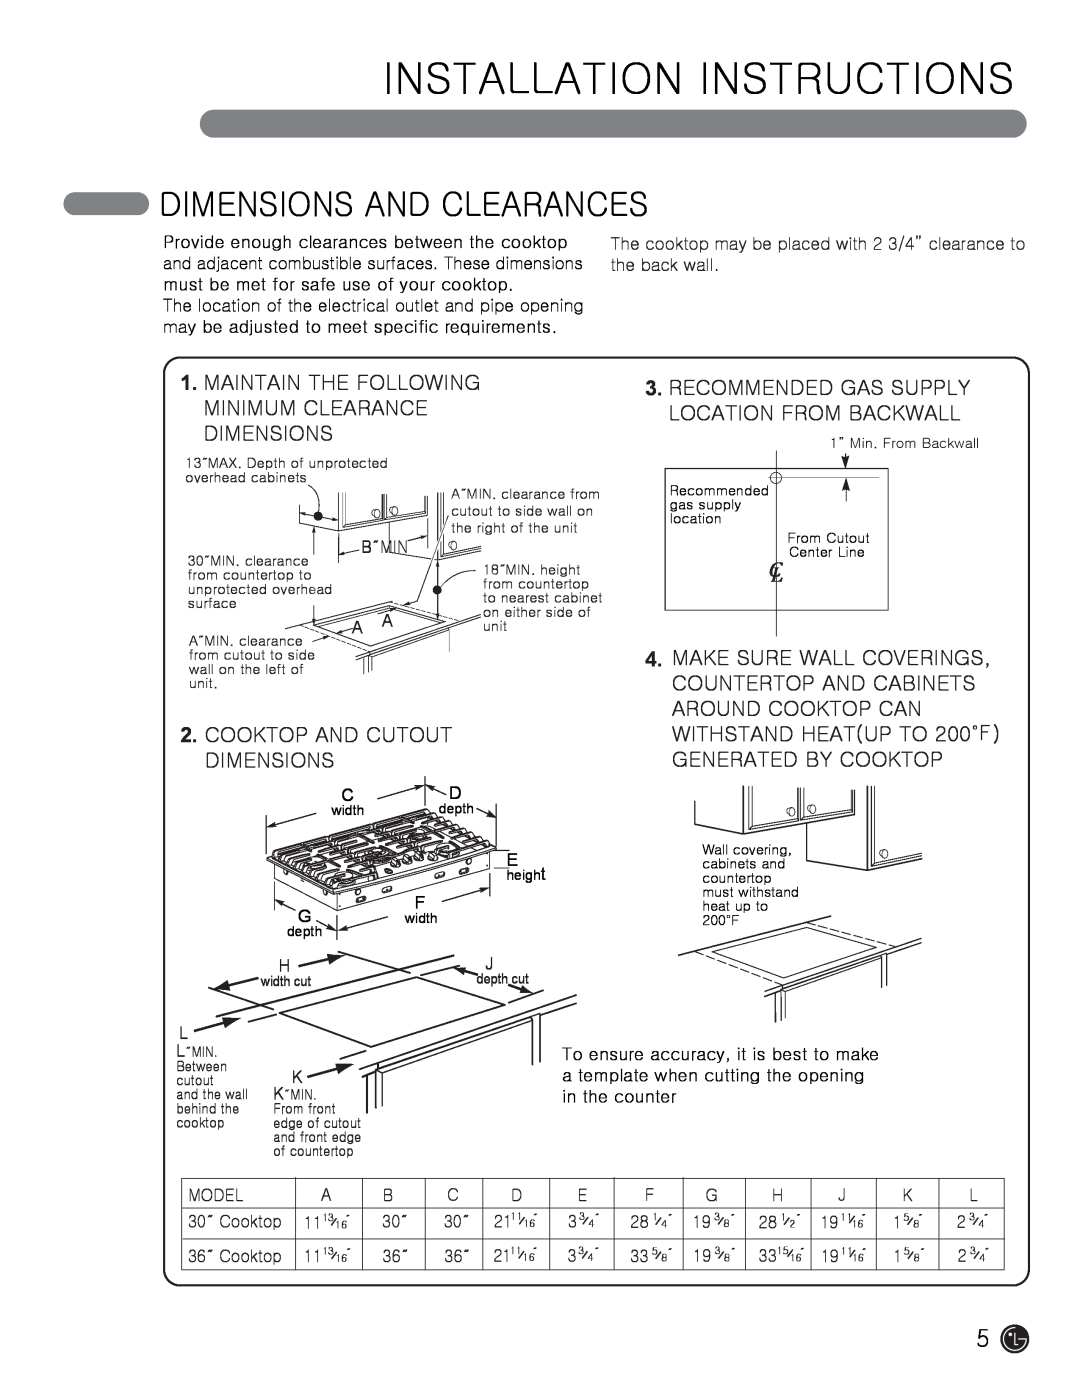 LG Electronics MFL62725501 Dimensions And Clearances, Installation Instructions, Maintain The Following, Minimum Clearance 